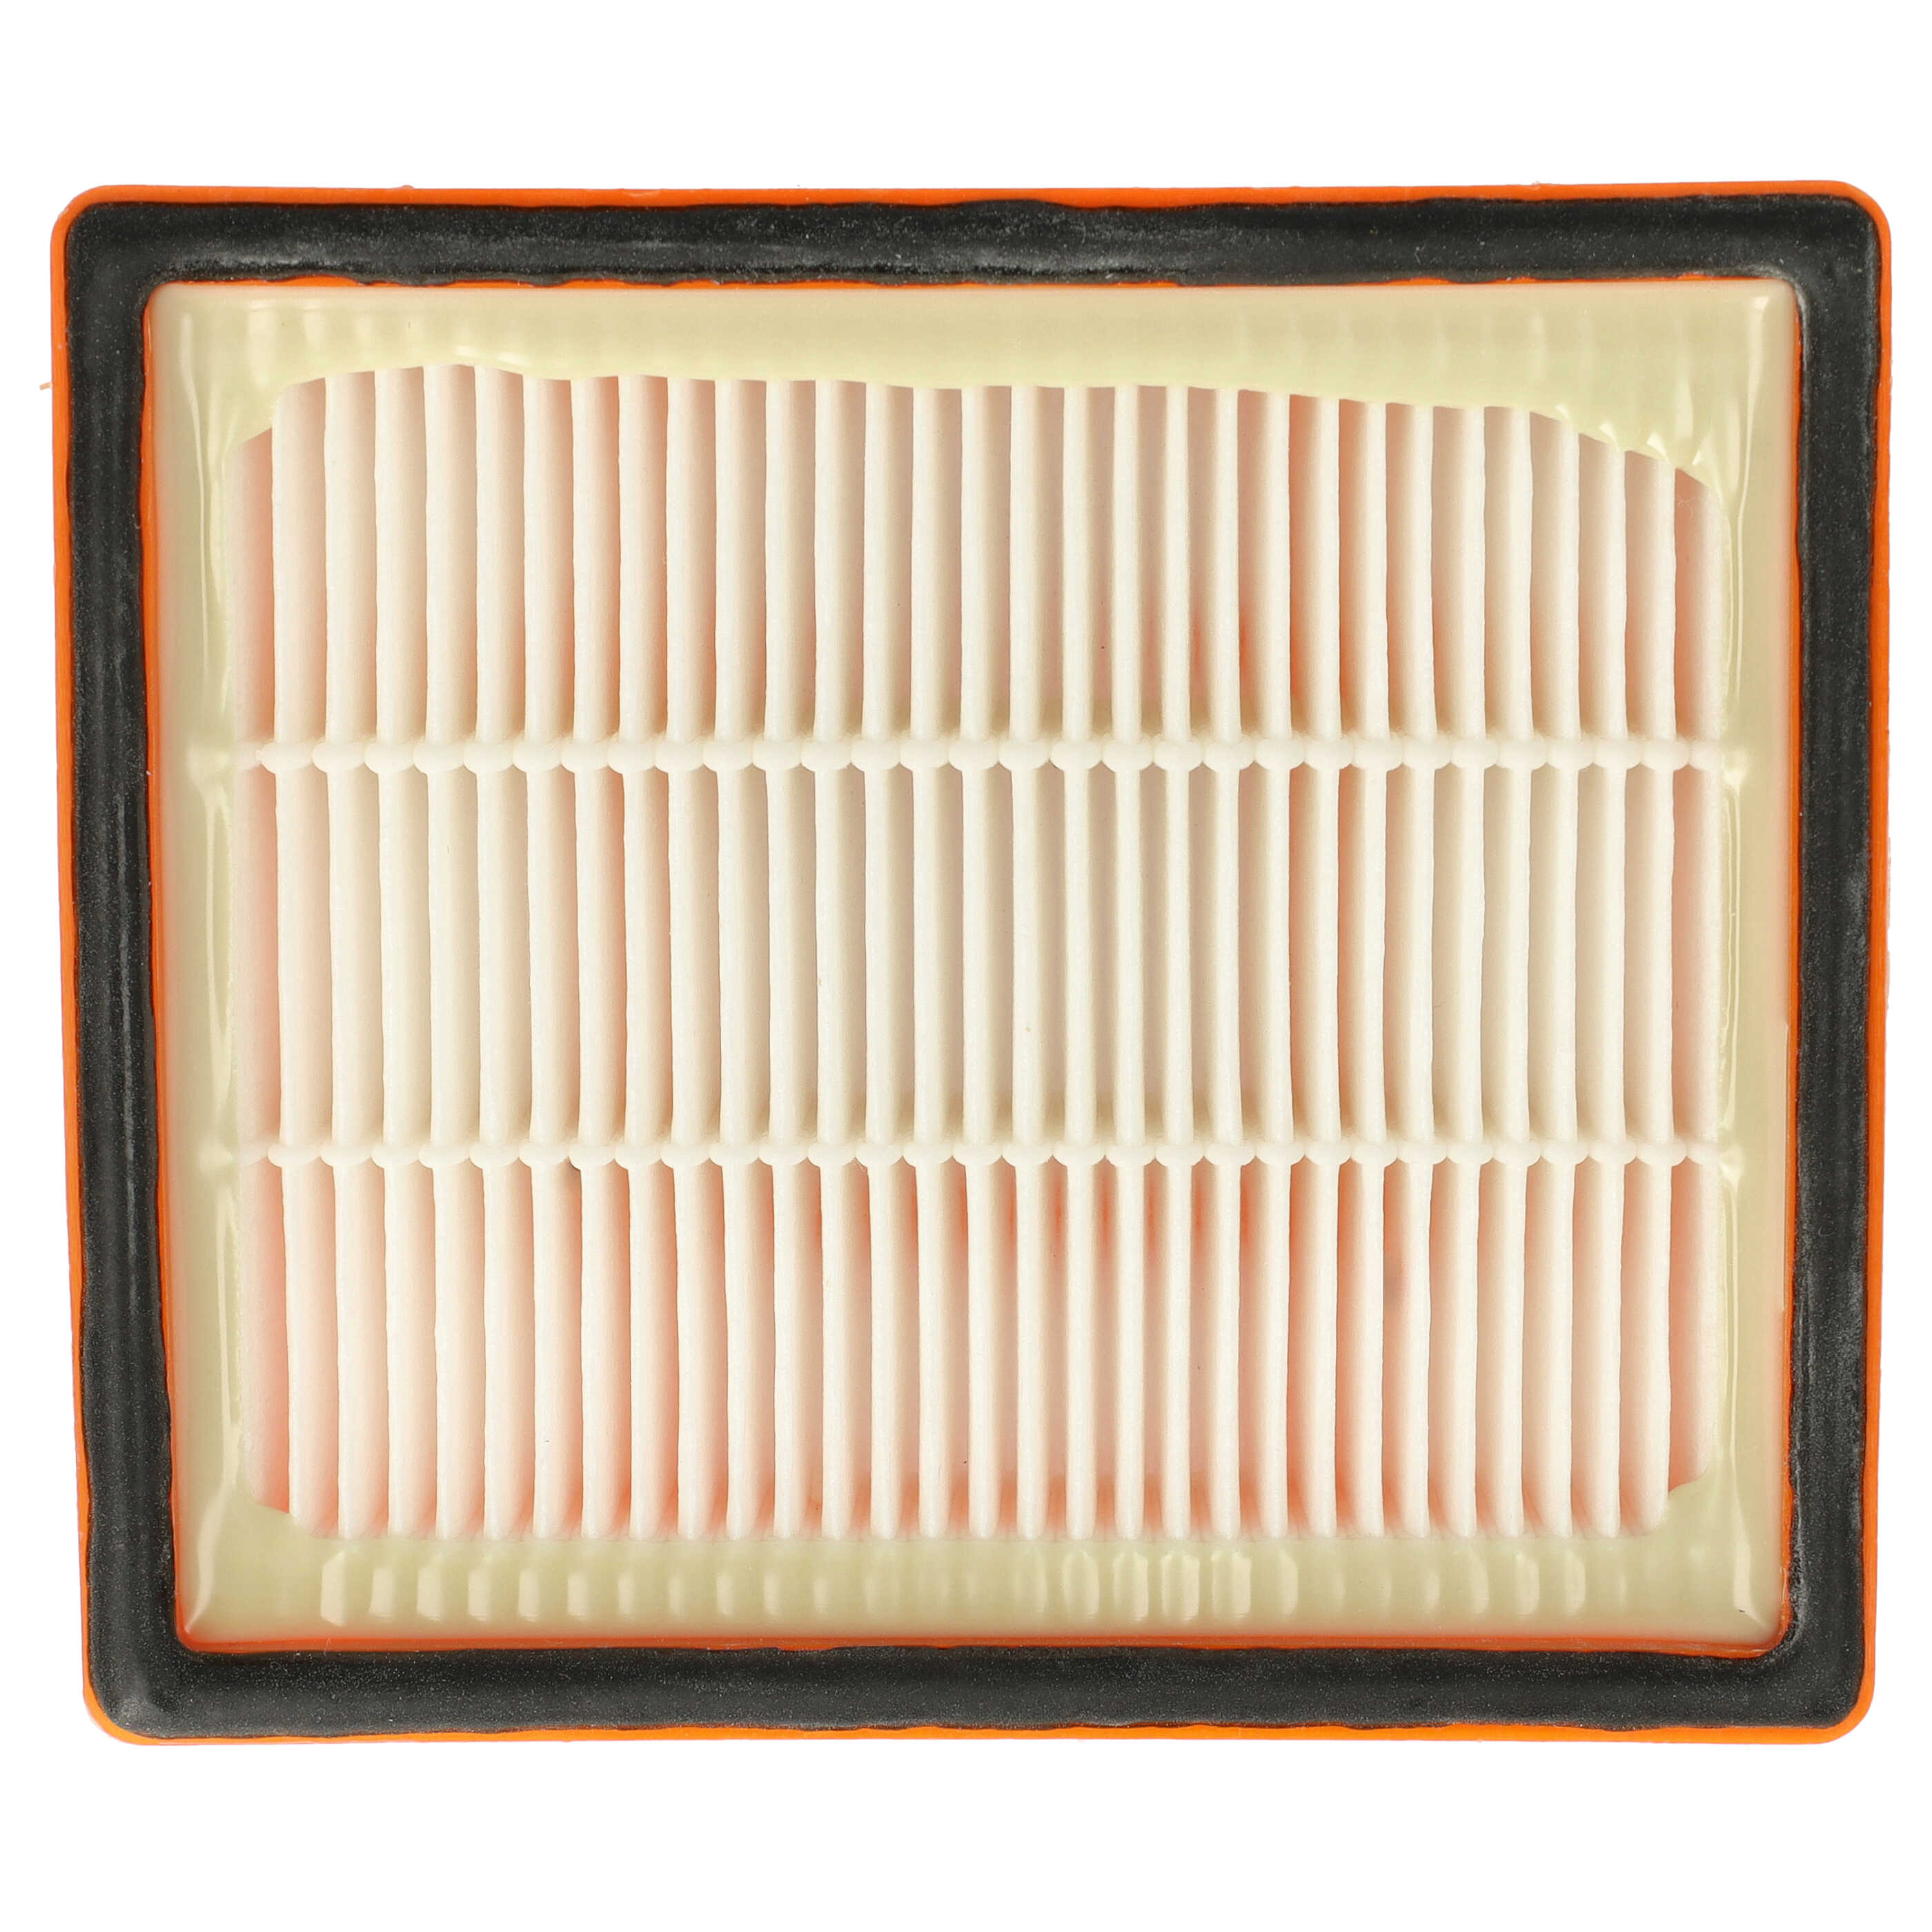 1x HEPA filter replaces AEG AEF 139 for ElectroluxVacuum Cleaner